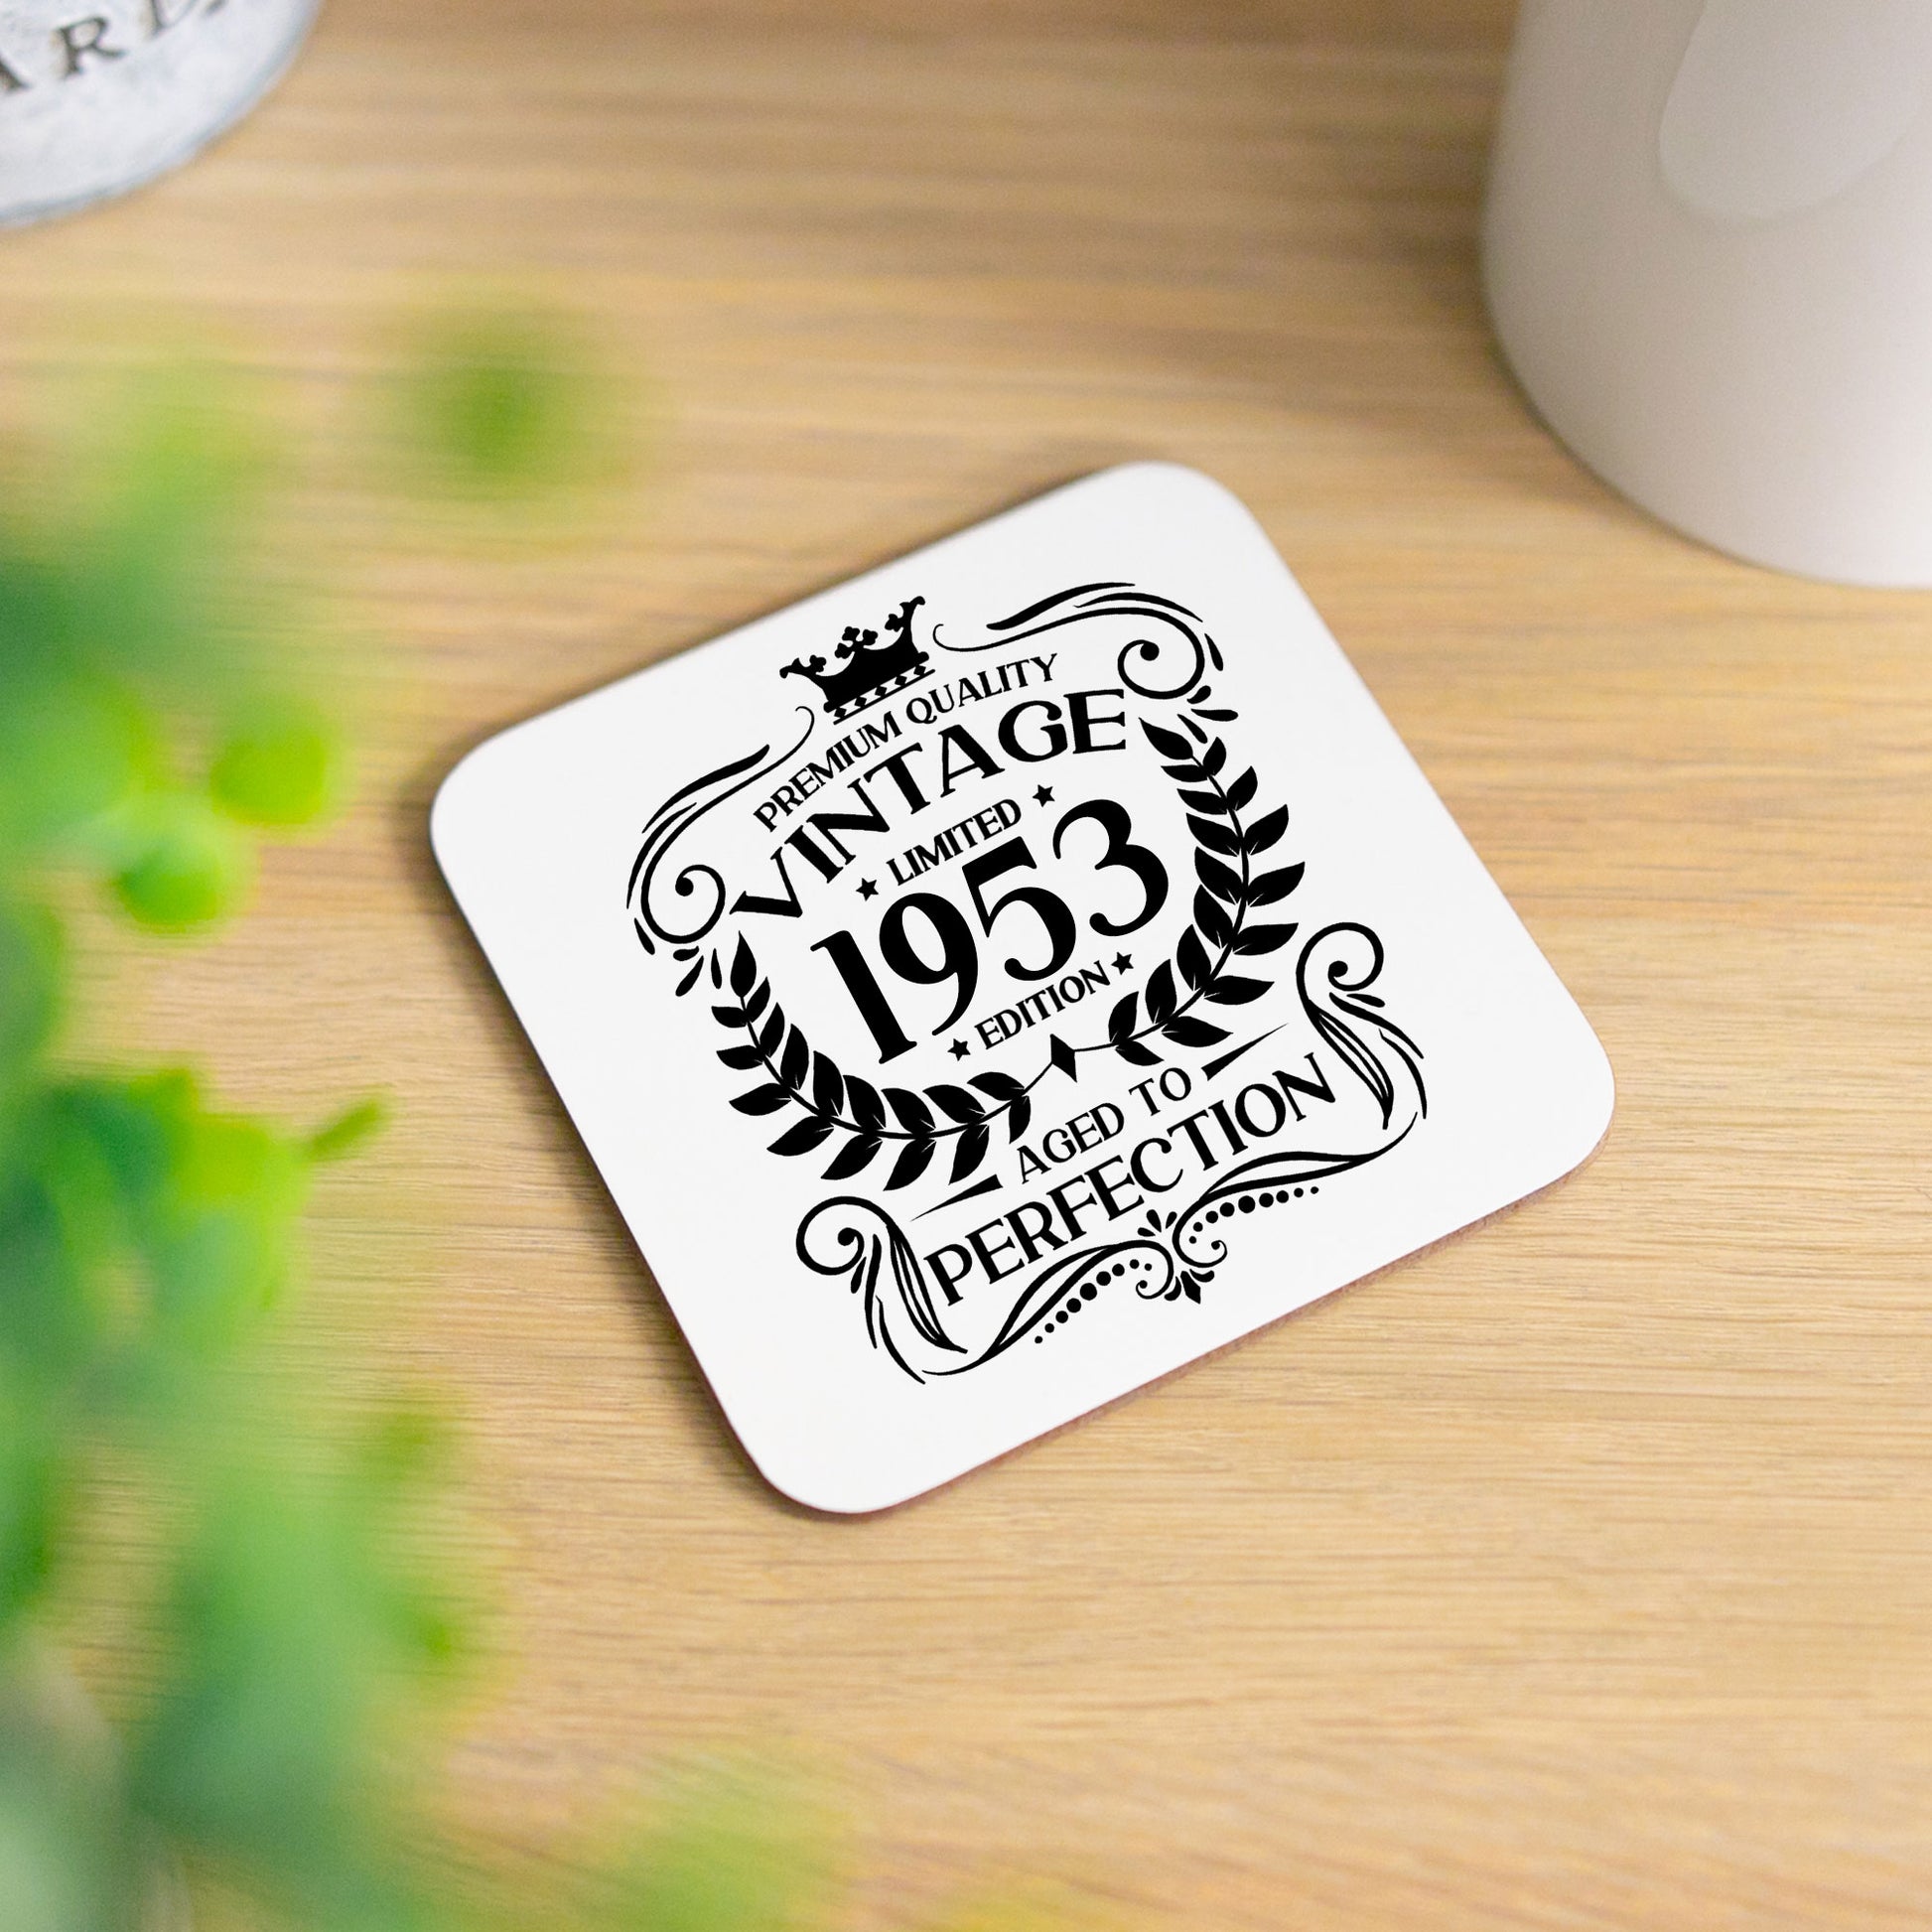 Vintage 1953 70th Birthday Engraved Wine Glass Gift  - Always Looking Good - Glass & Printed Coaster  